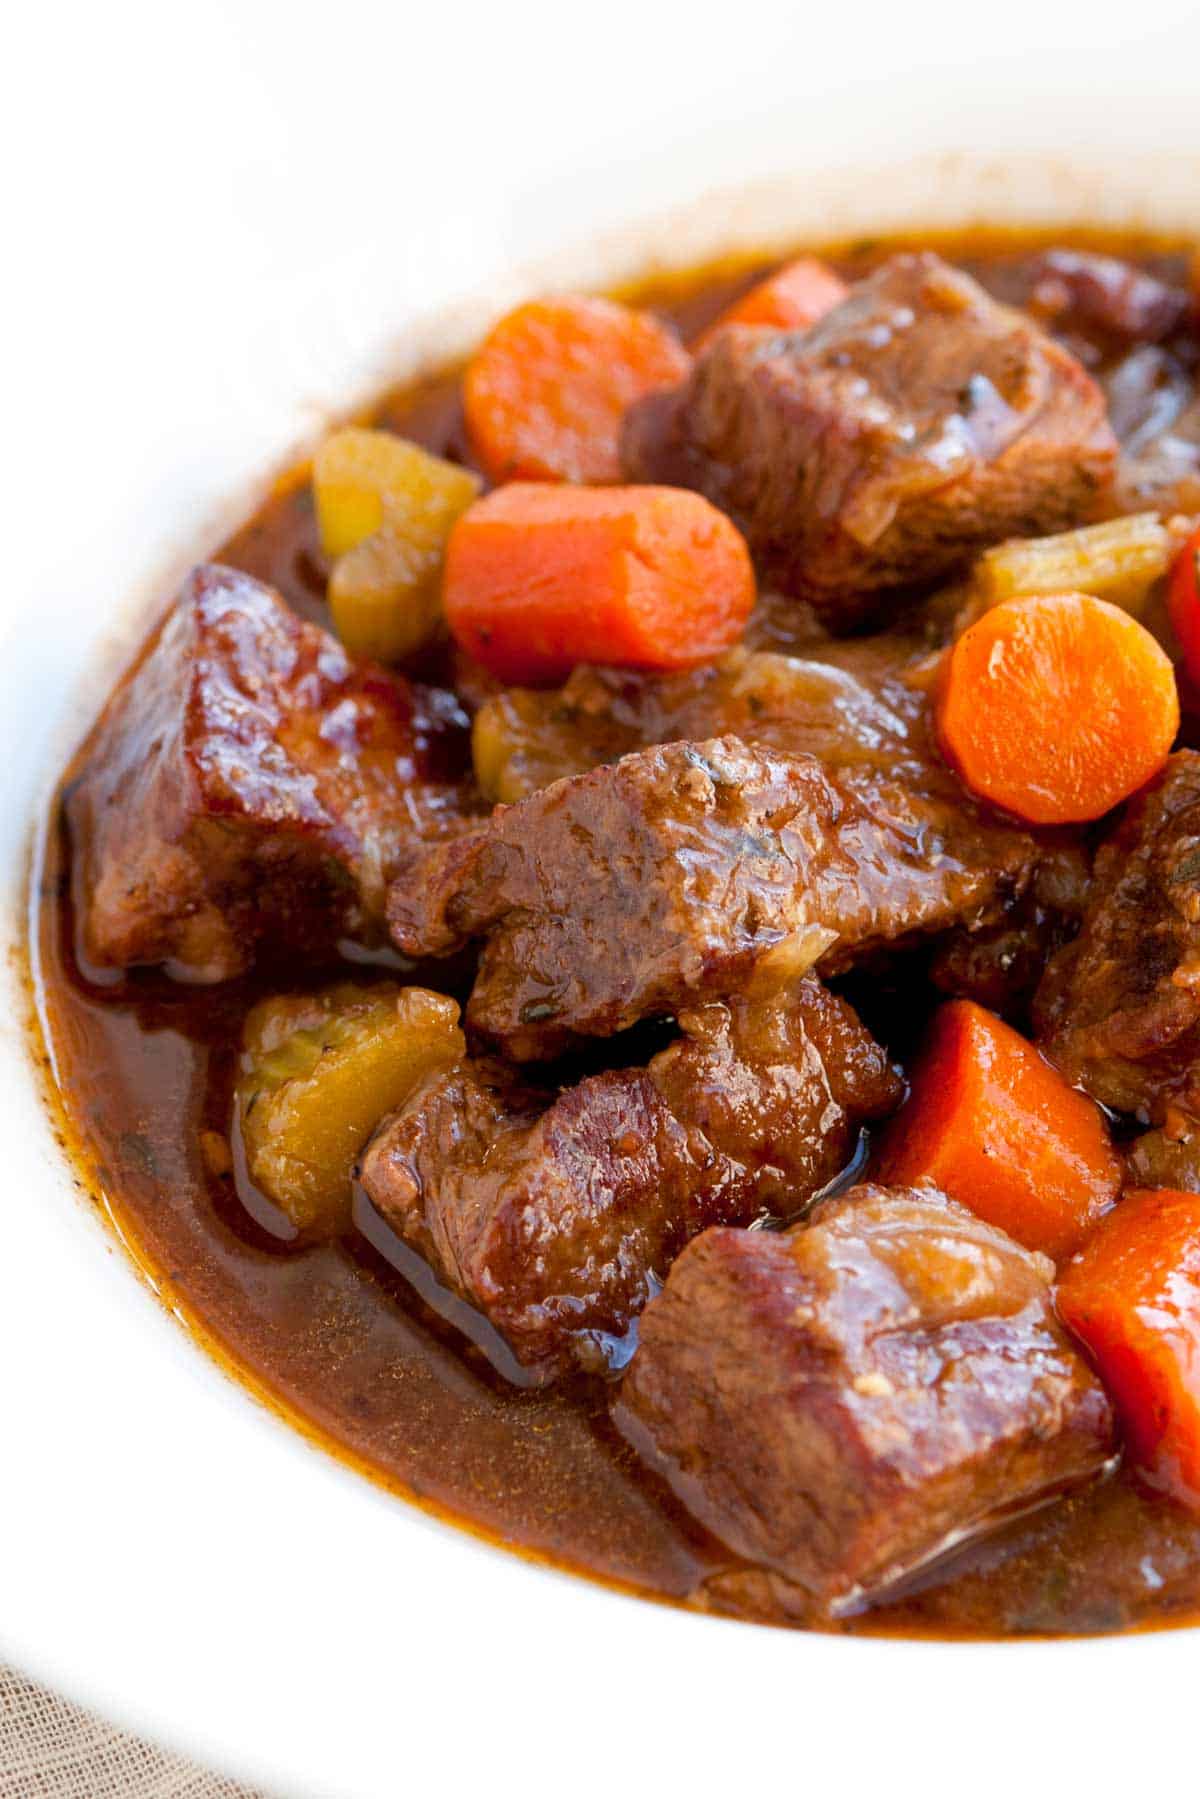 What is a simple beef stew recipie?